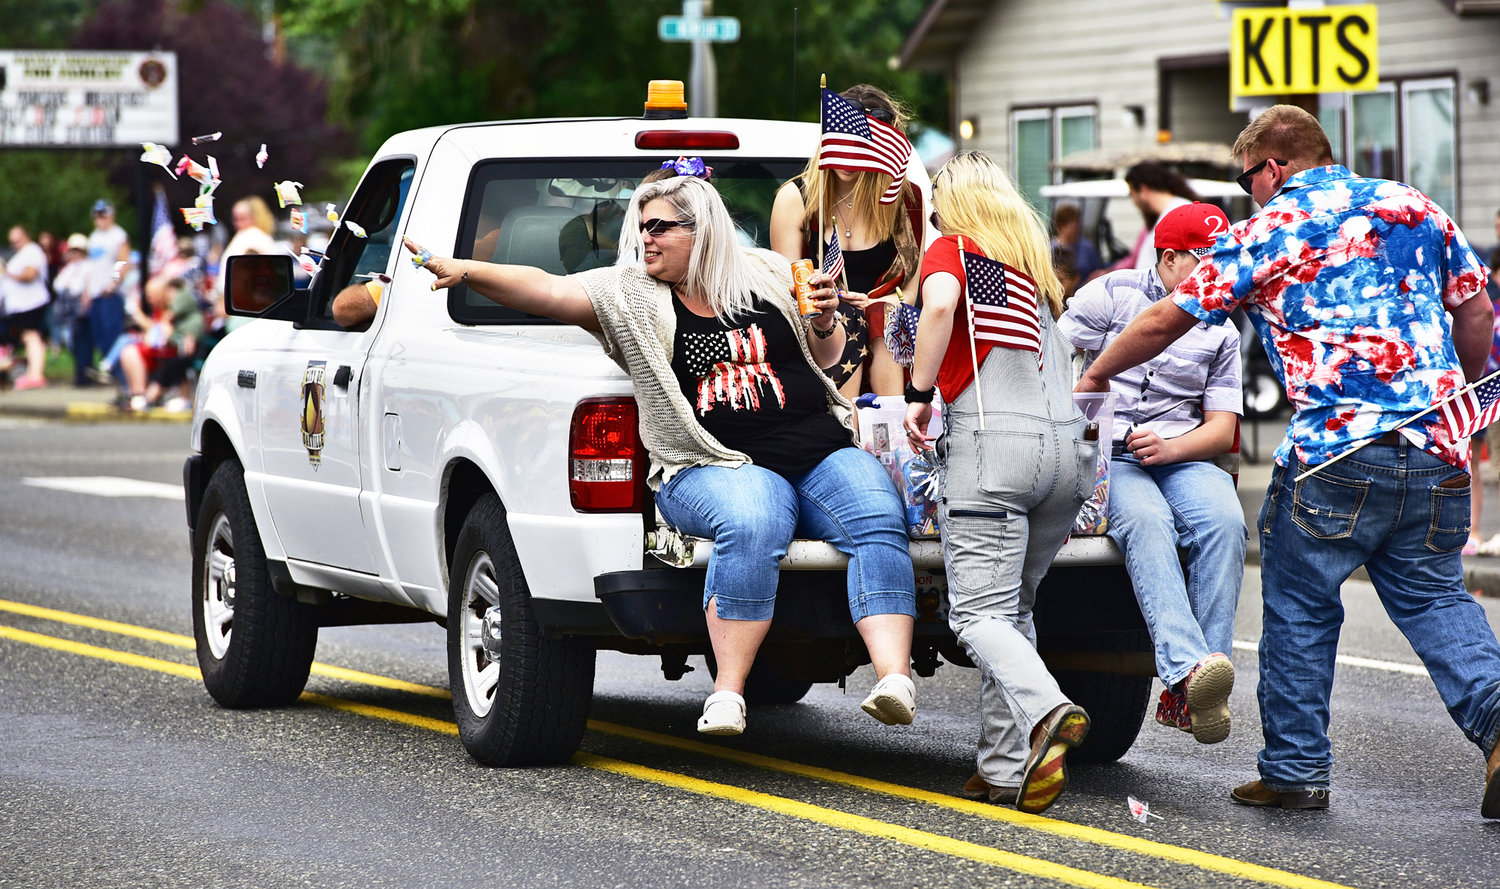 With a neat flick of the wrist, a woman tosses a handful of candy to waiting spectators during Oakville’s Independence Day parade on Saturday, July 3.